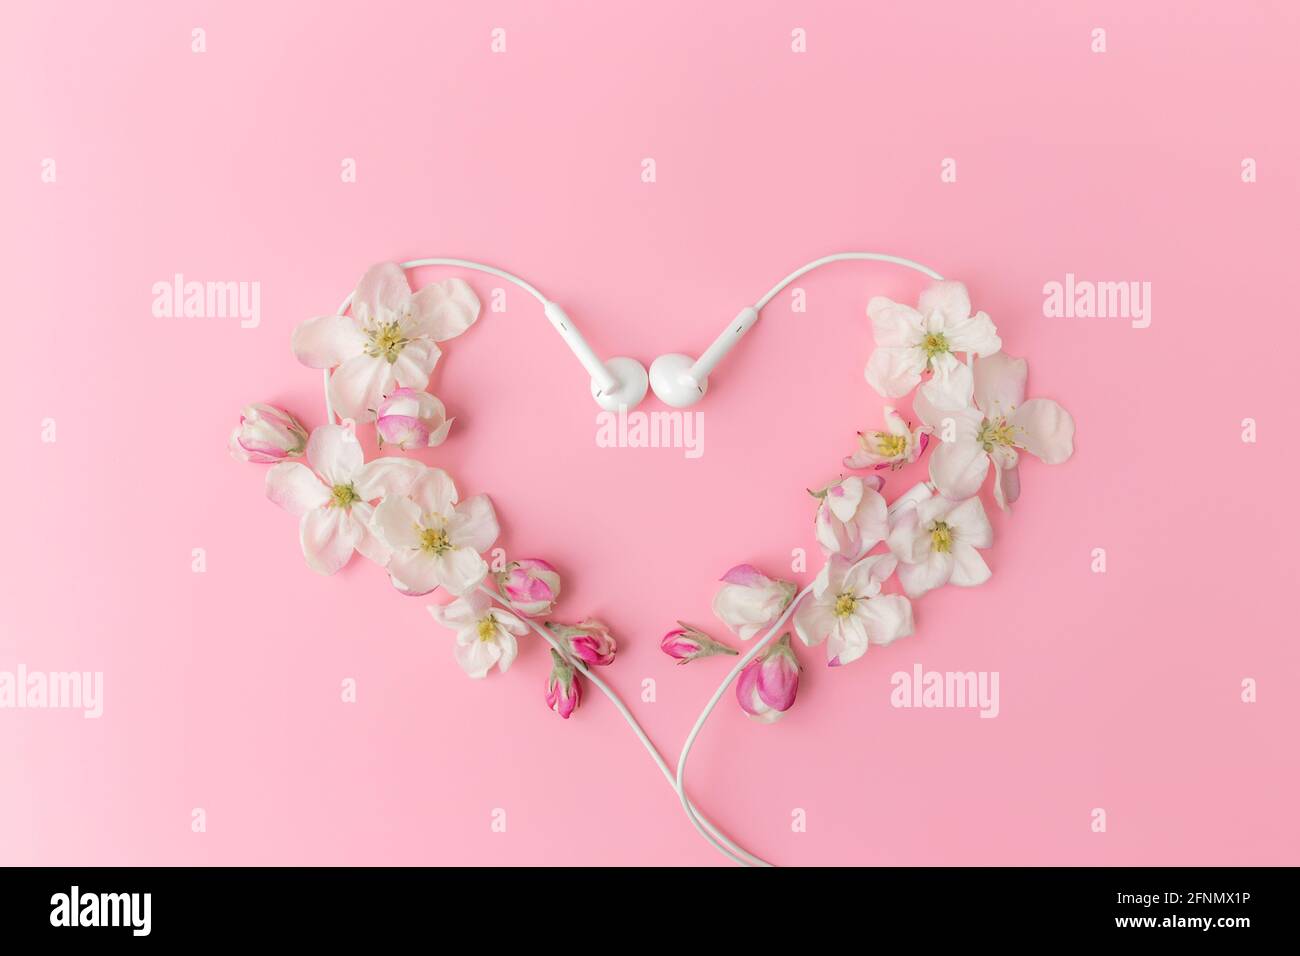 Music lover concept flat lay on pink background with apple blossom heart shape ornament border and earphones Stock Photo